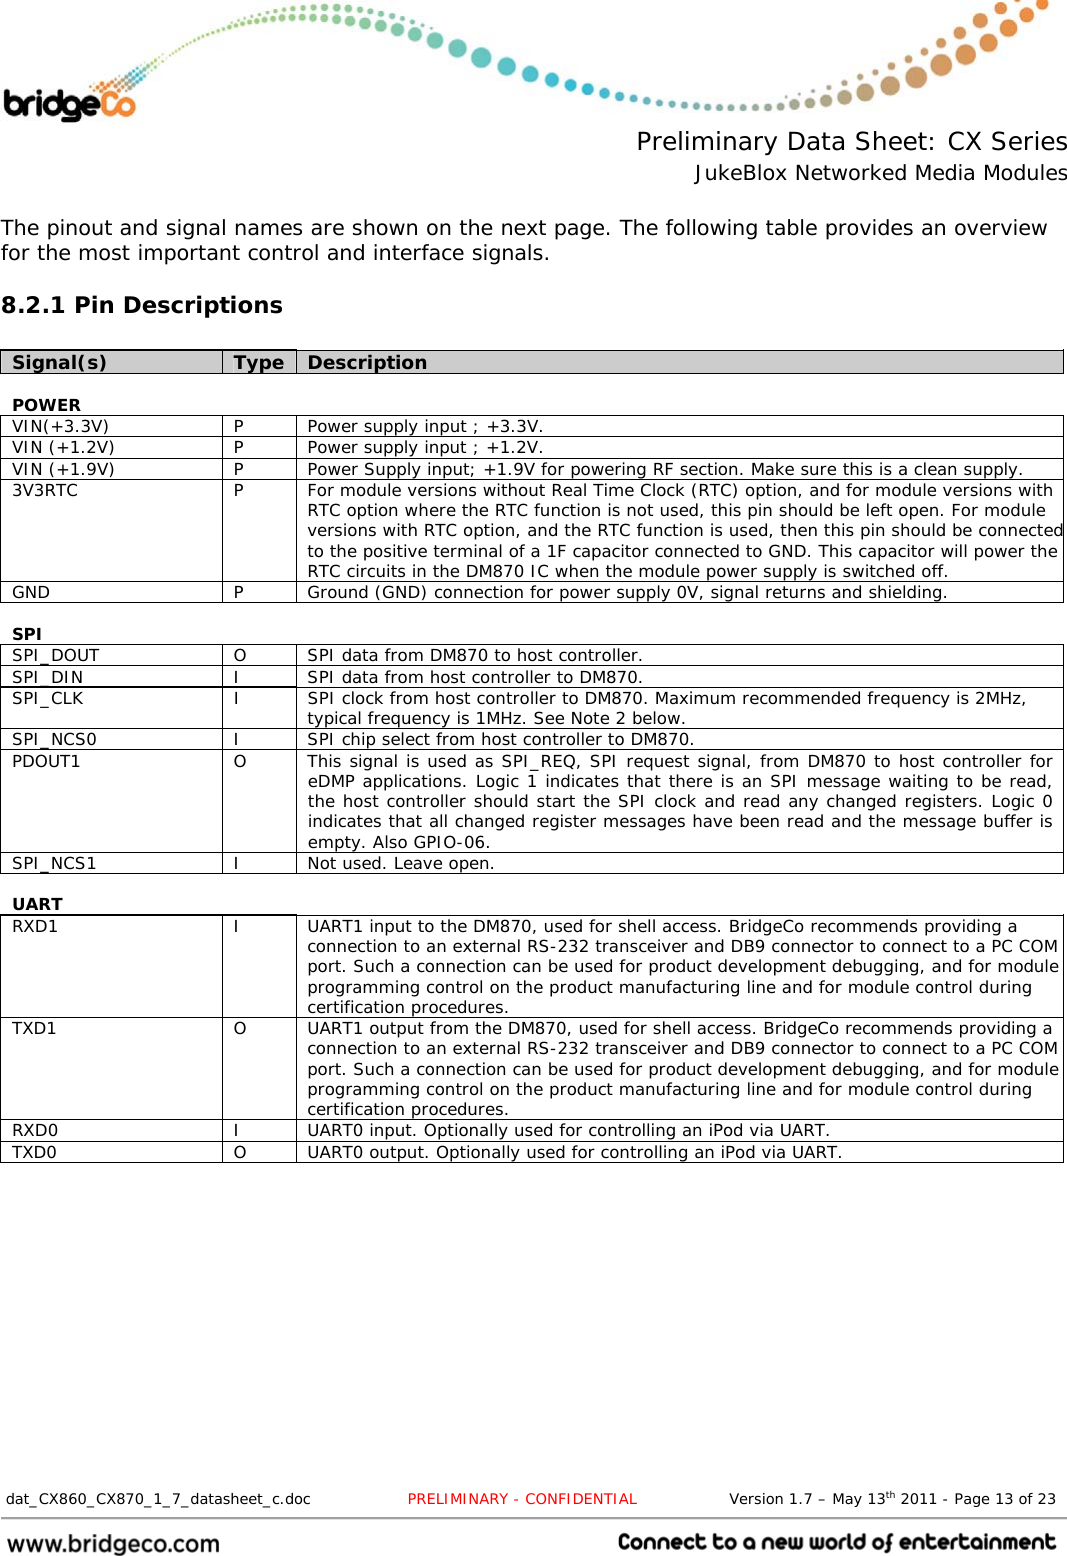  Preliminary Data Sheet: CX Series JukeBlox Networked Media Modules  dat_CX860_CX870_1_7_datasheet_c.doc                   PRELIMINARY - CONFIDENTIAL                  Version 1.7 – May 13th 2011 - Page 13 of 23                                  The pinout and signal names are shown on the next page. The following table provides an overview for the most important control and interface signals. 8.2.1 Pin Descriptions  Signal(s)  Type  Description  POWER    VIN(+3.3V)  P  Power supply input ; +3.3V. VIN (+1.2V)  P  Power supply input ; +1.2V. VIN (+1.9V)  P  Power Supply input; +1.9V for powering RF section. Make sure this is a clean supply. 3V3RTC  P  For module versions without Real Time Clock (RTC) option, and for module versions with RTC option where the RTC function is not used, this pin should be left open. For module versions with RTC option, and the RTC function is used, then this pin should be connectedto the positive terminal of a 1F capacitor connected to GND. This capacitor will power the RTC circuits in the DM870 IC when the module power supply is switched off. GND P Ground (GND) connection for power supply 0V, signal returns and shielding.  SPI    SPI_DOUT  O  SPI data from DM870 to host controller. SPI_DIN  I  SPI data from host controller to DM870. SPI_CLK  I  SPI clock from host controller to DM870. Maximum recommended frequency is 2MHz, typical frequency is 1MHz. See Note 2 below. SPI_NCS0  I  SPI chip select from host controller to DM870. PDOUT1  O  This signal is used as SPI_REQ, SPI request signal, from DM870 to host controller for eDMP applications. Logic 1 indicates that there is an SPI message waiting to be read, the host controller should start the SPI clock and read any changed registers. Logic 0 indicates that all changed register messages have been read and the message buffer is empty. Also GPIO-06. SPI_NCS1  I  Not used. Leave open.  UART    RXD1  I  UART1 input to the DM870, used for shell access. BridgeCo recommends providing a connection to an external RS-232 transceiver and DB9 connector to connect to a PC COM port. Such a connection can be used for product development debugging, and for module programming control on the product manufacturing line and for module control during certification procedures. TXD1  O  UART1 output from the DM870, used for shell access. BridgeCo recommends providing a connection to an external RS-232 transceiver and DB9 connector to connect to a PC COM port. Such a connection can be used for product development debugging, and for module programming control on the product manufacturing line and for module control during certification procedures. RXD0  I  UART0 input. Optionally used for controlling an iPod via UART. TXD0  O  UART0 output. Optionally used for controlling an iPod via UART. 